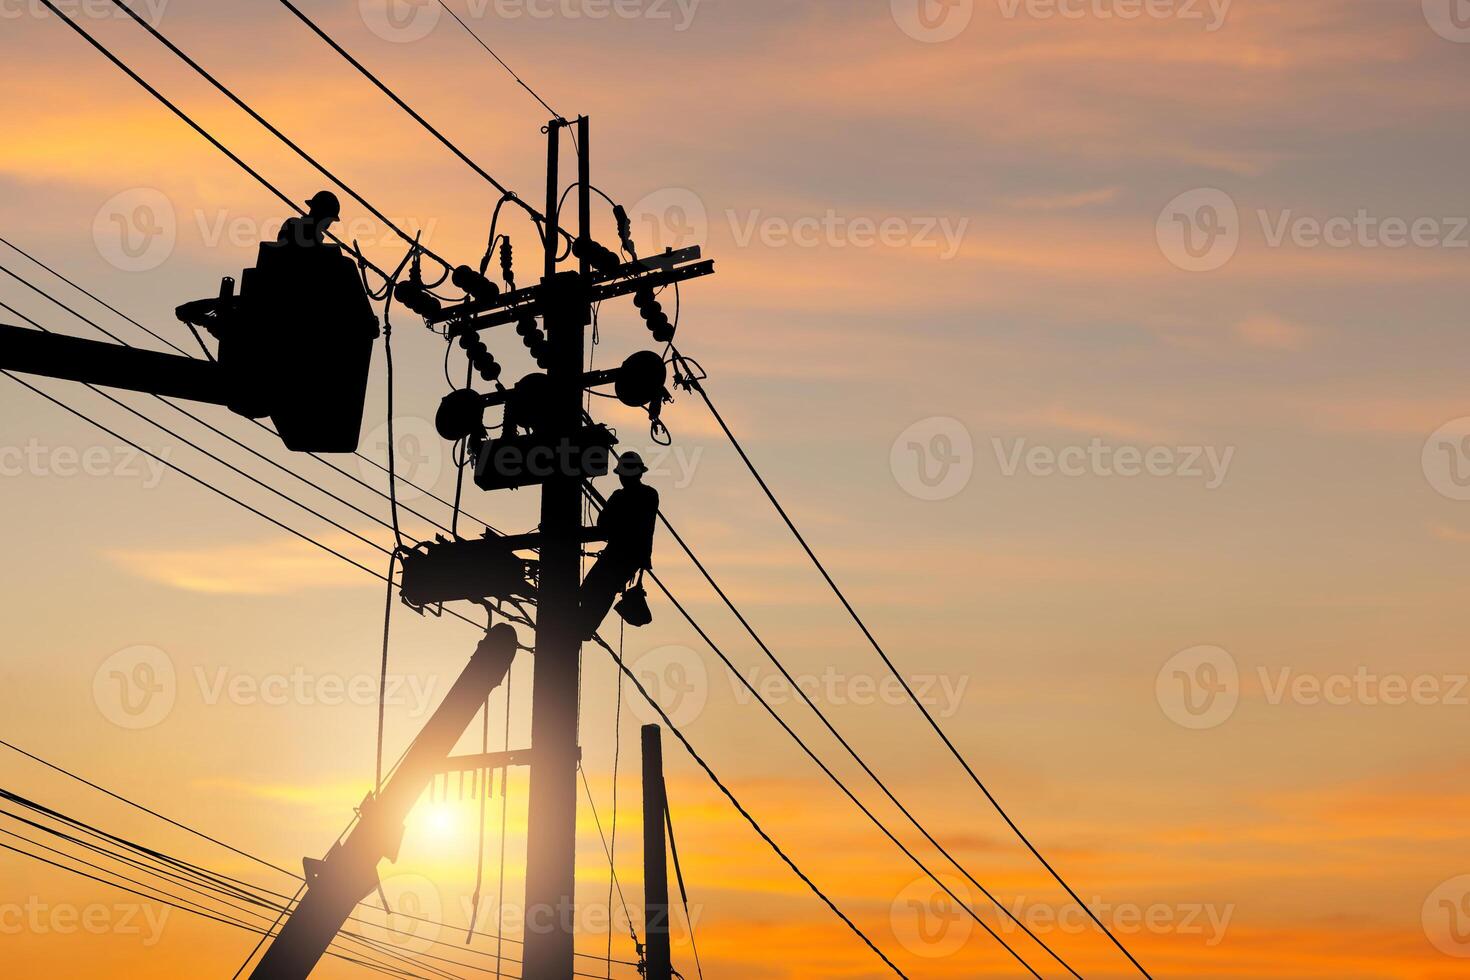 Silhouette of Electrician officer team climbs a pole and using a cable car to maintain a high voltage line system, Electrician lineman repairman worker climbing work on the electric post power pole photo